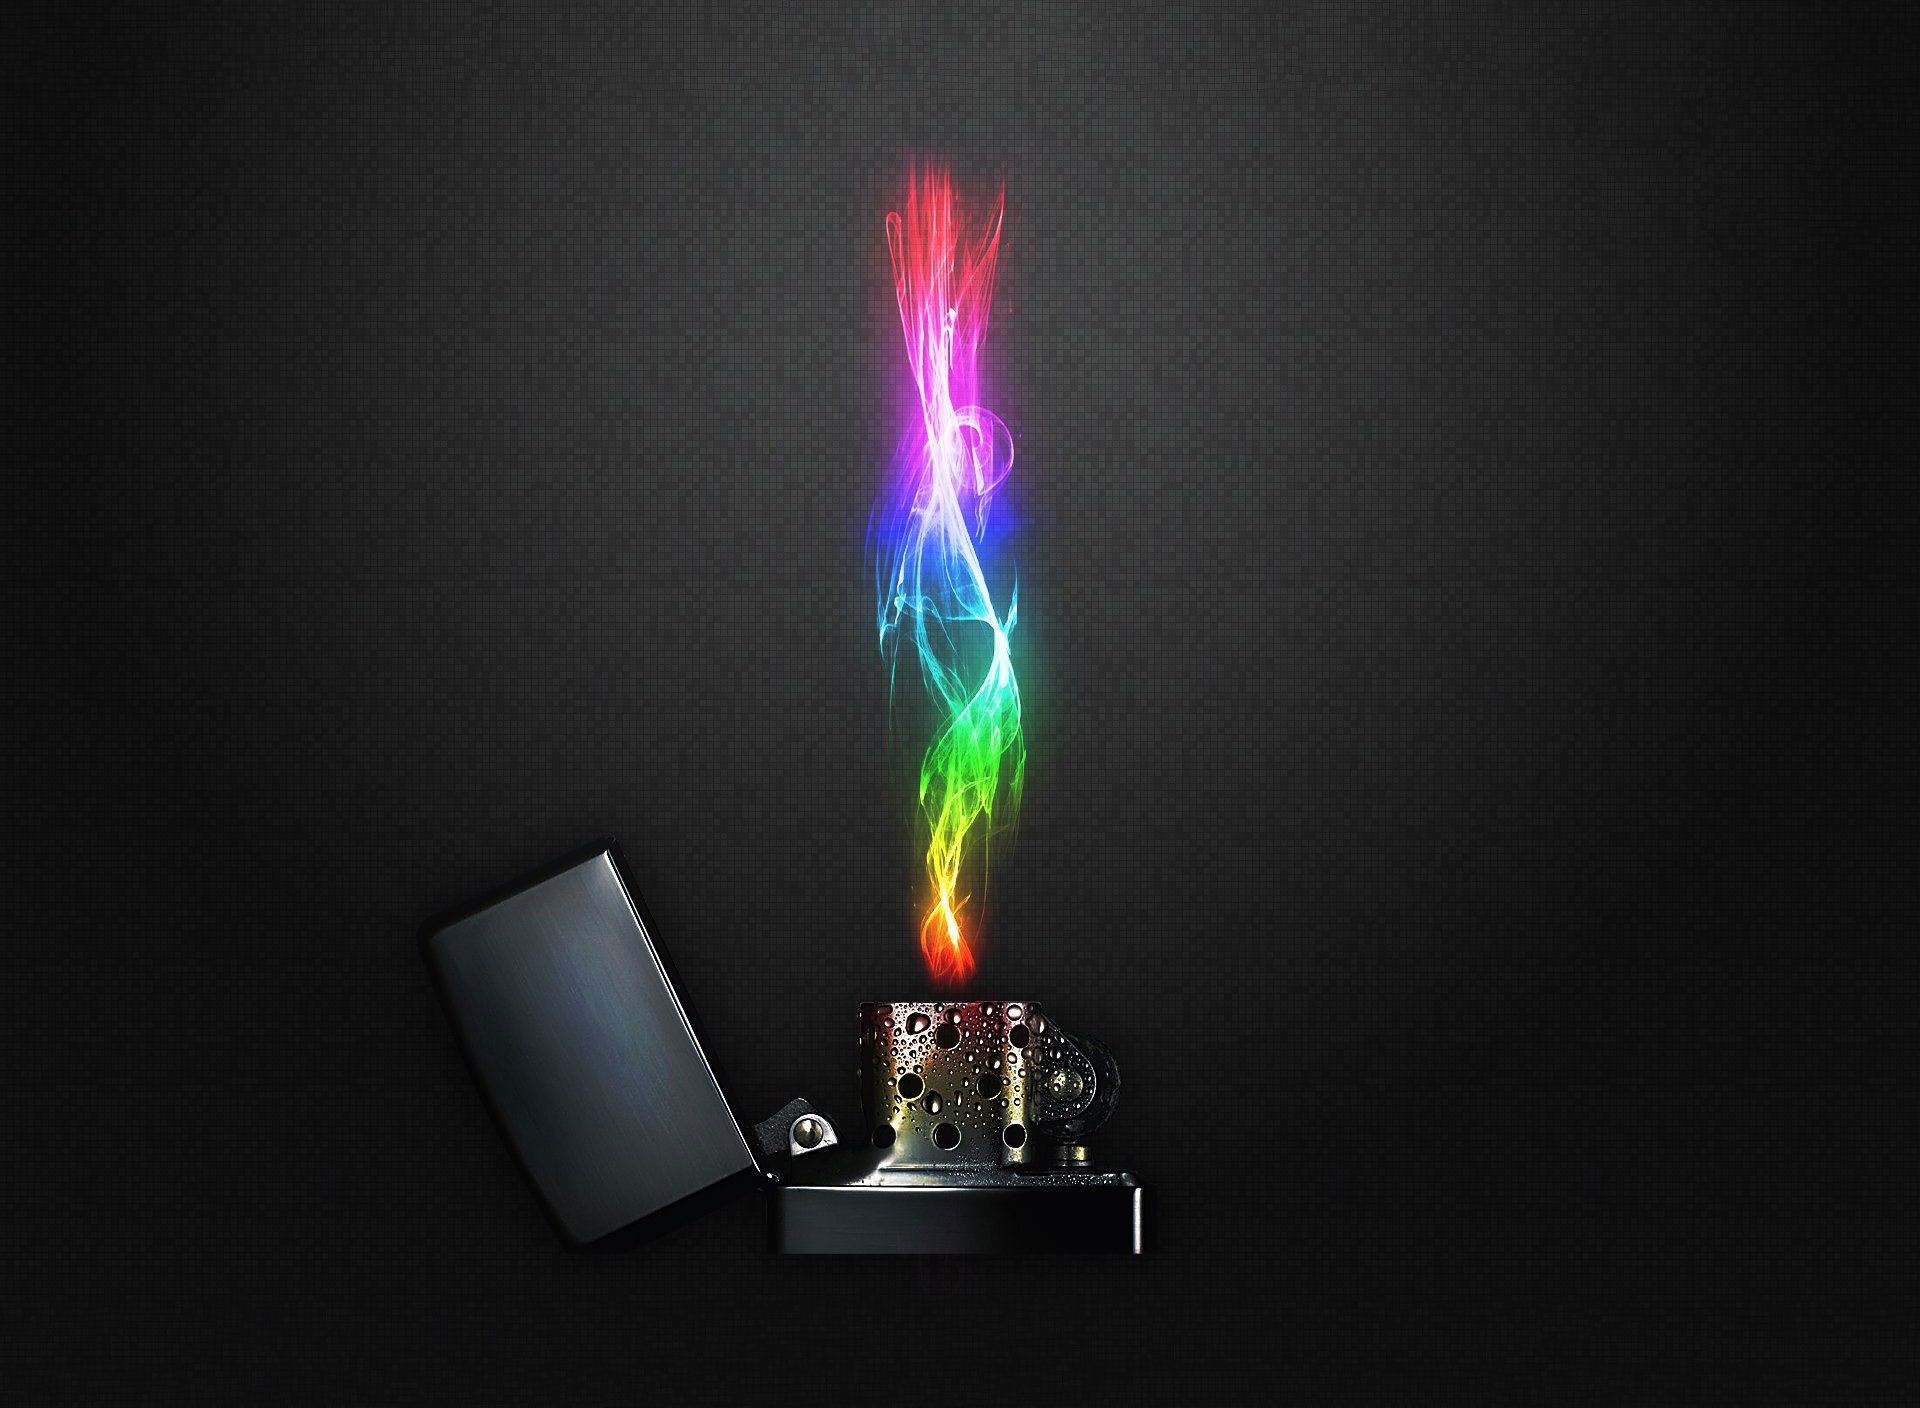 Rainbow Fire Wallpaper Background Other Amazon Kindle